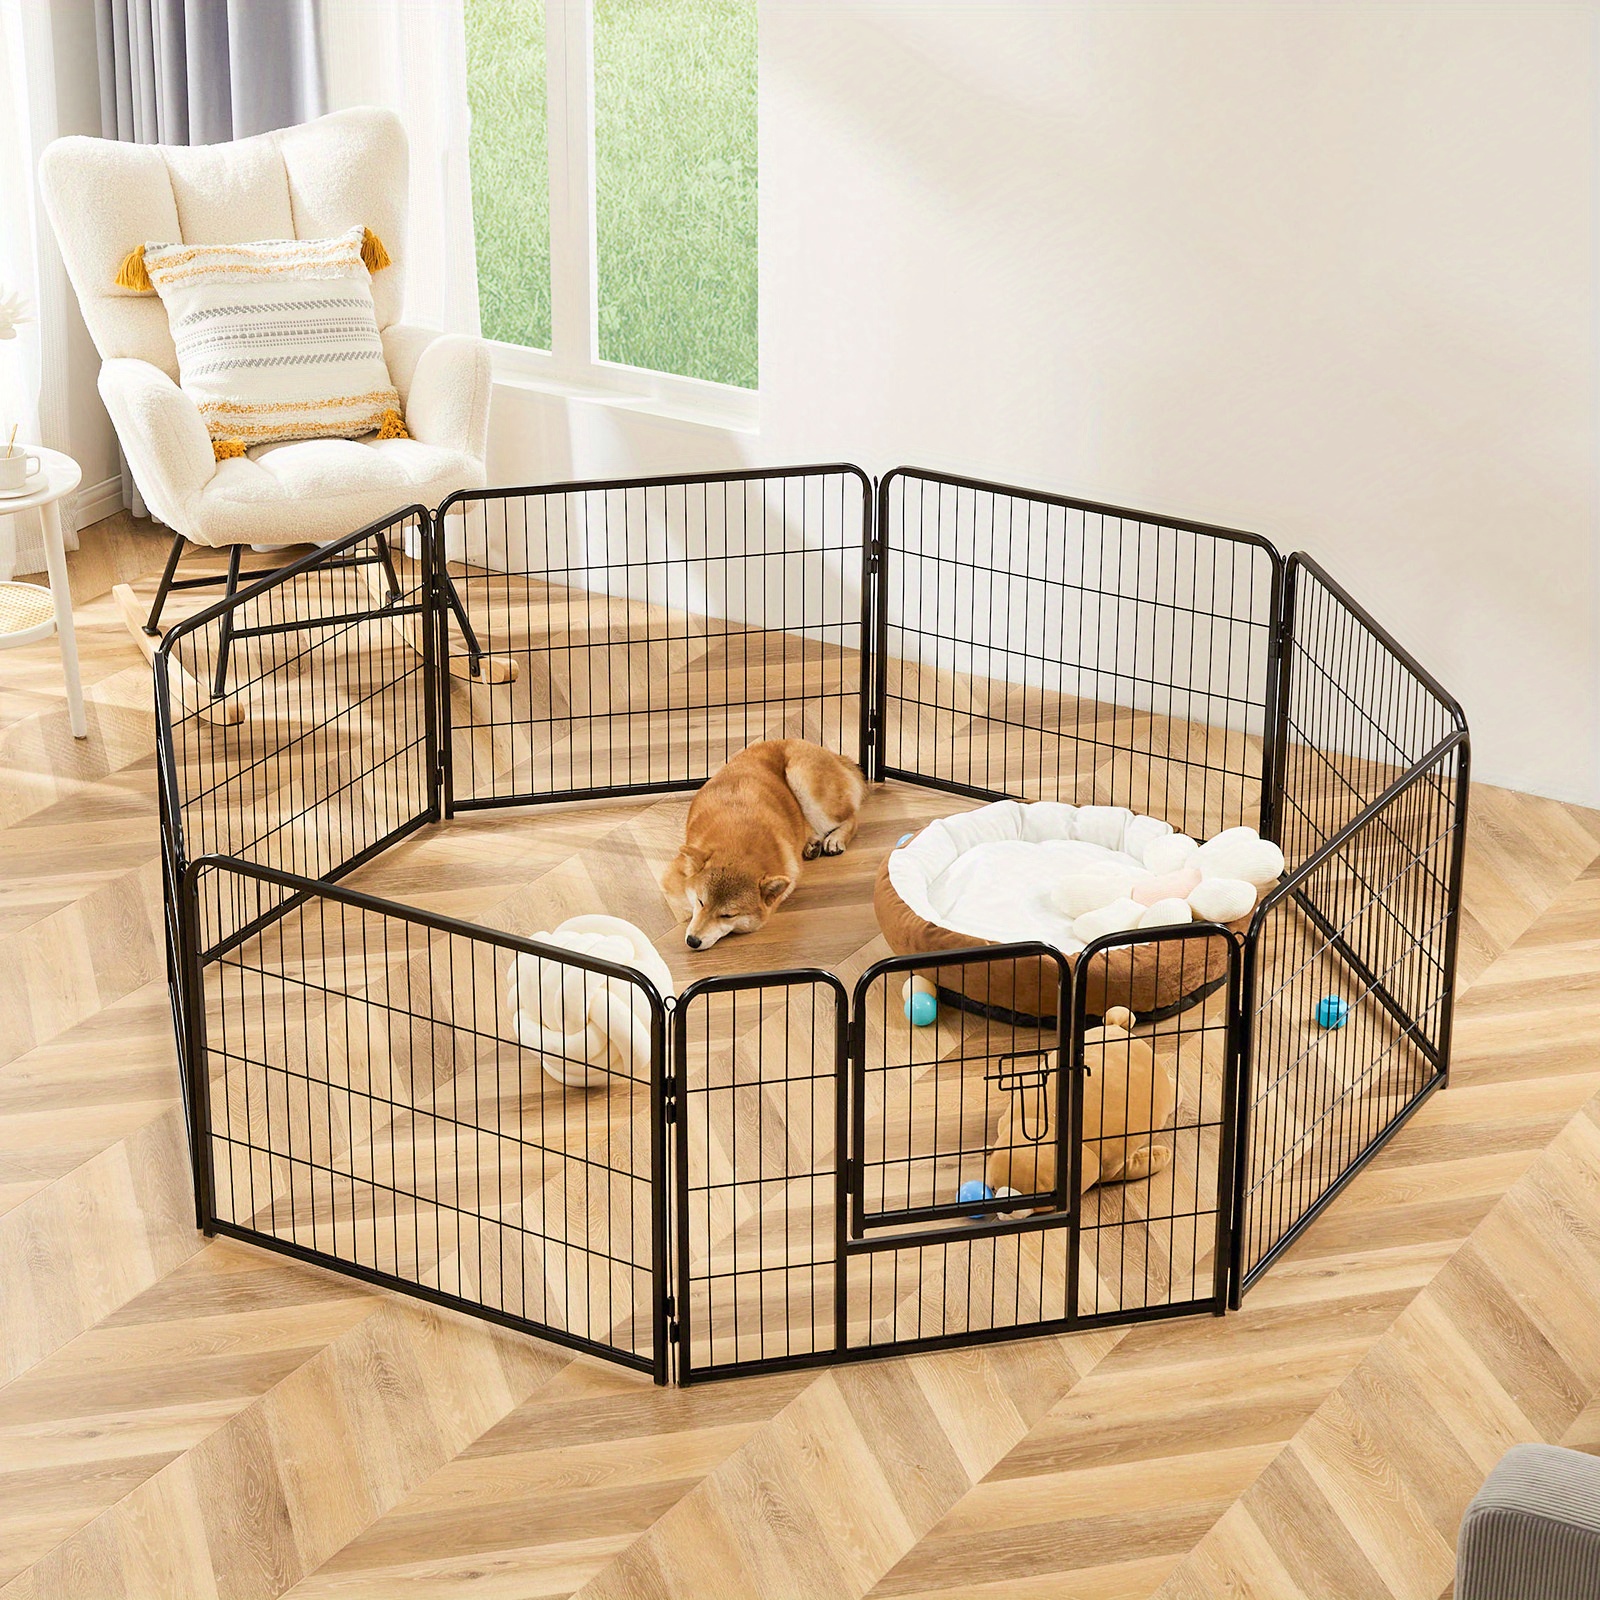 

Dog Playpen Indoor Fence 16 Panel 24" Height Metal Exercise Pen With Door Small Puppy/medium/large Dogs Animal Pet For Outdoor, Garden, Yard, Rv Camping